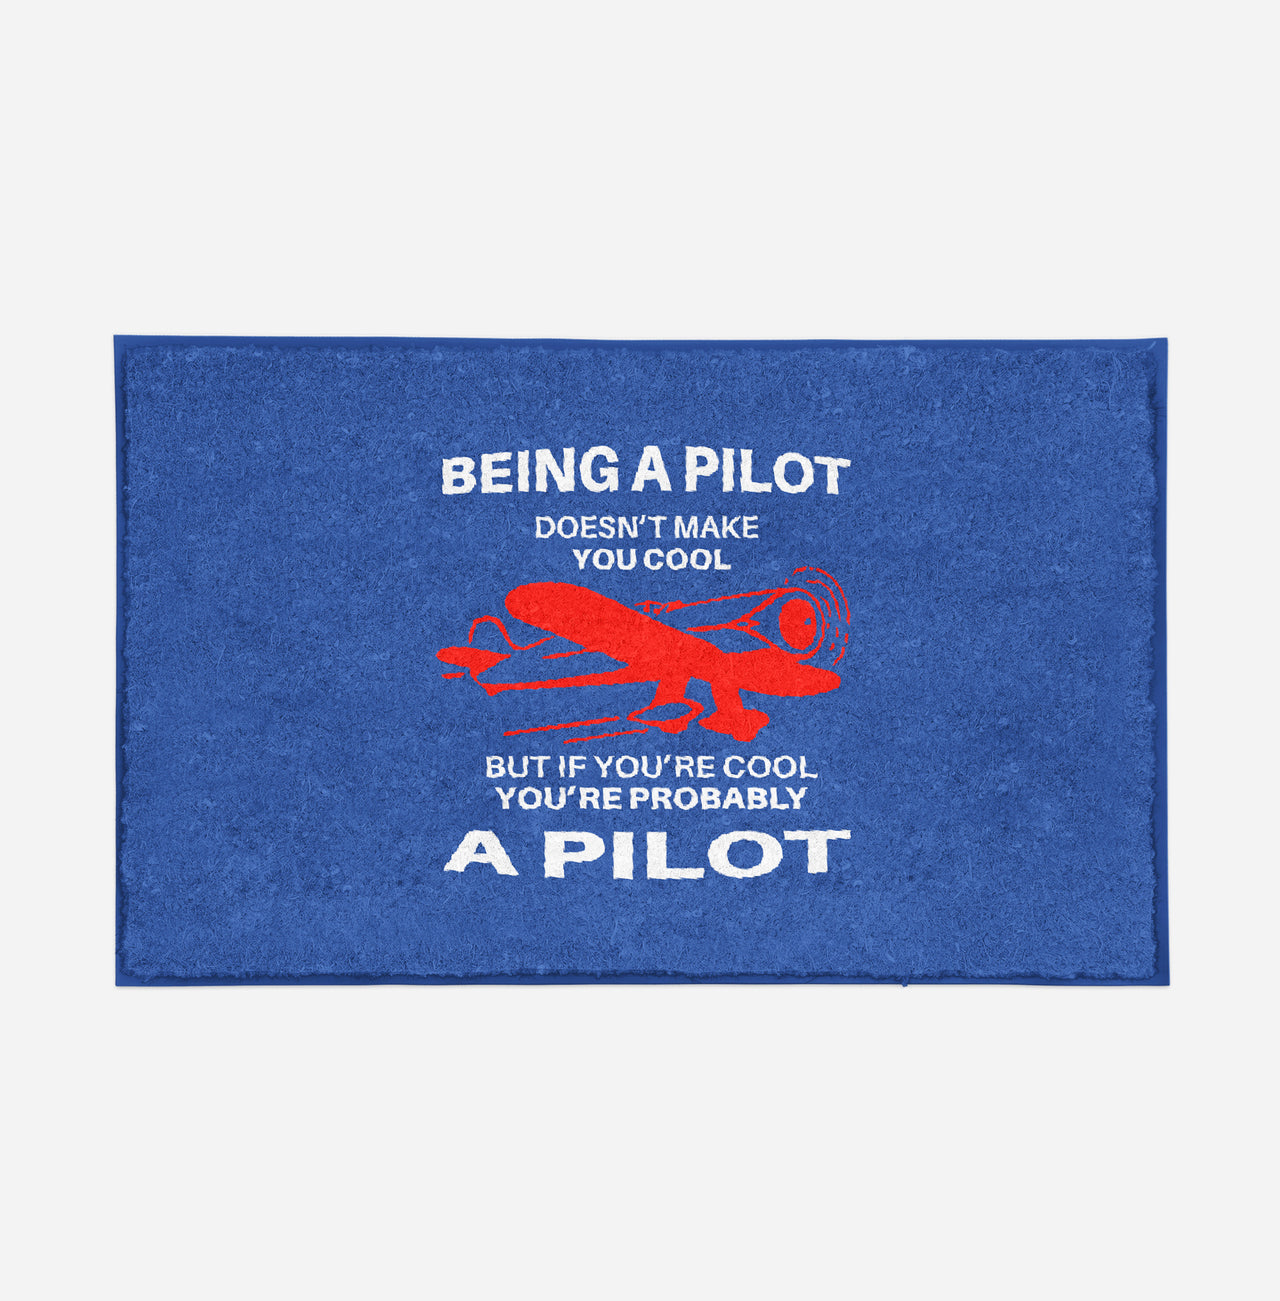 If You're Cool You're Probably a Pilot Designed Door Mats